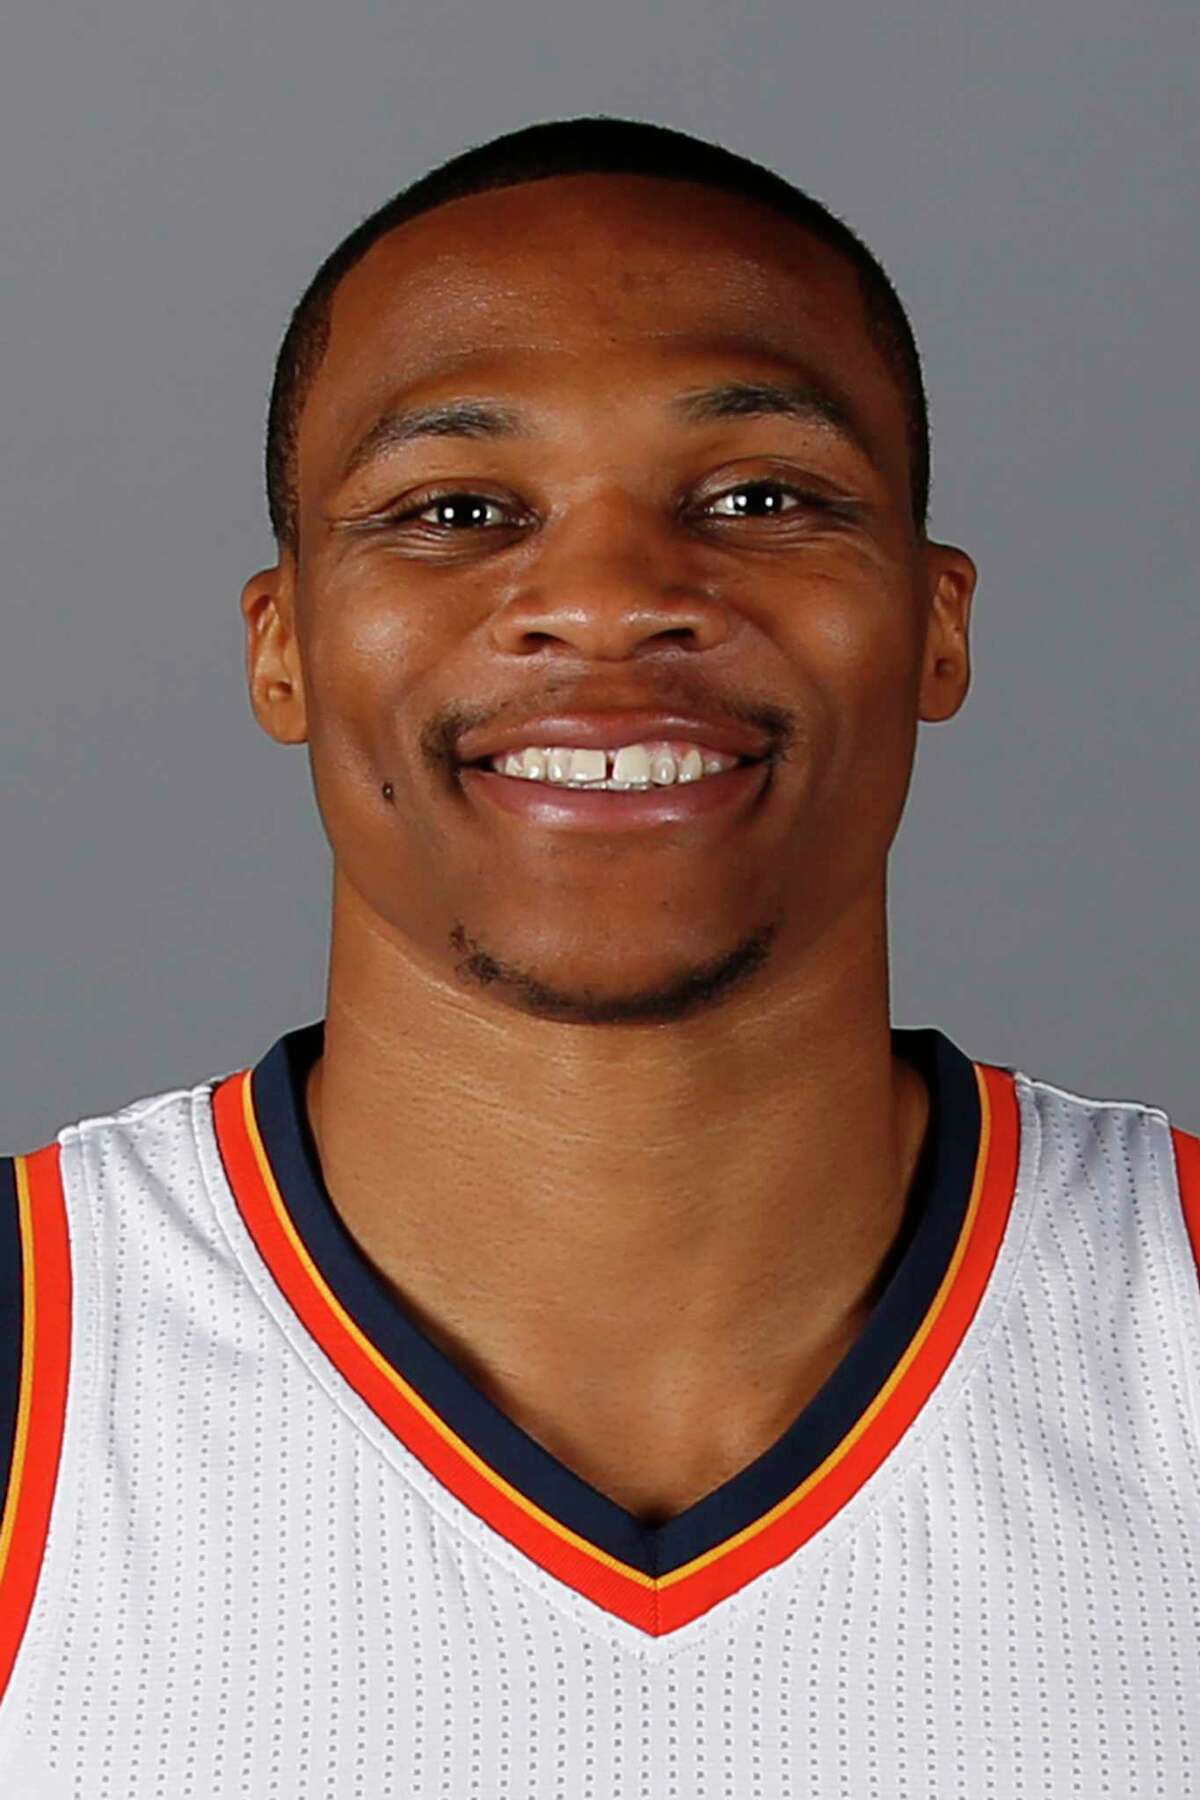 This a headshot of basketball player Russell Westbrook. Russell Westbrook is an active basketball player for the Oklahoma City Thunder as of Friday, Sept. 23, 2016 in the NBA. (AP Photo/Sue Ogrocki)